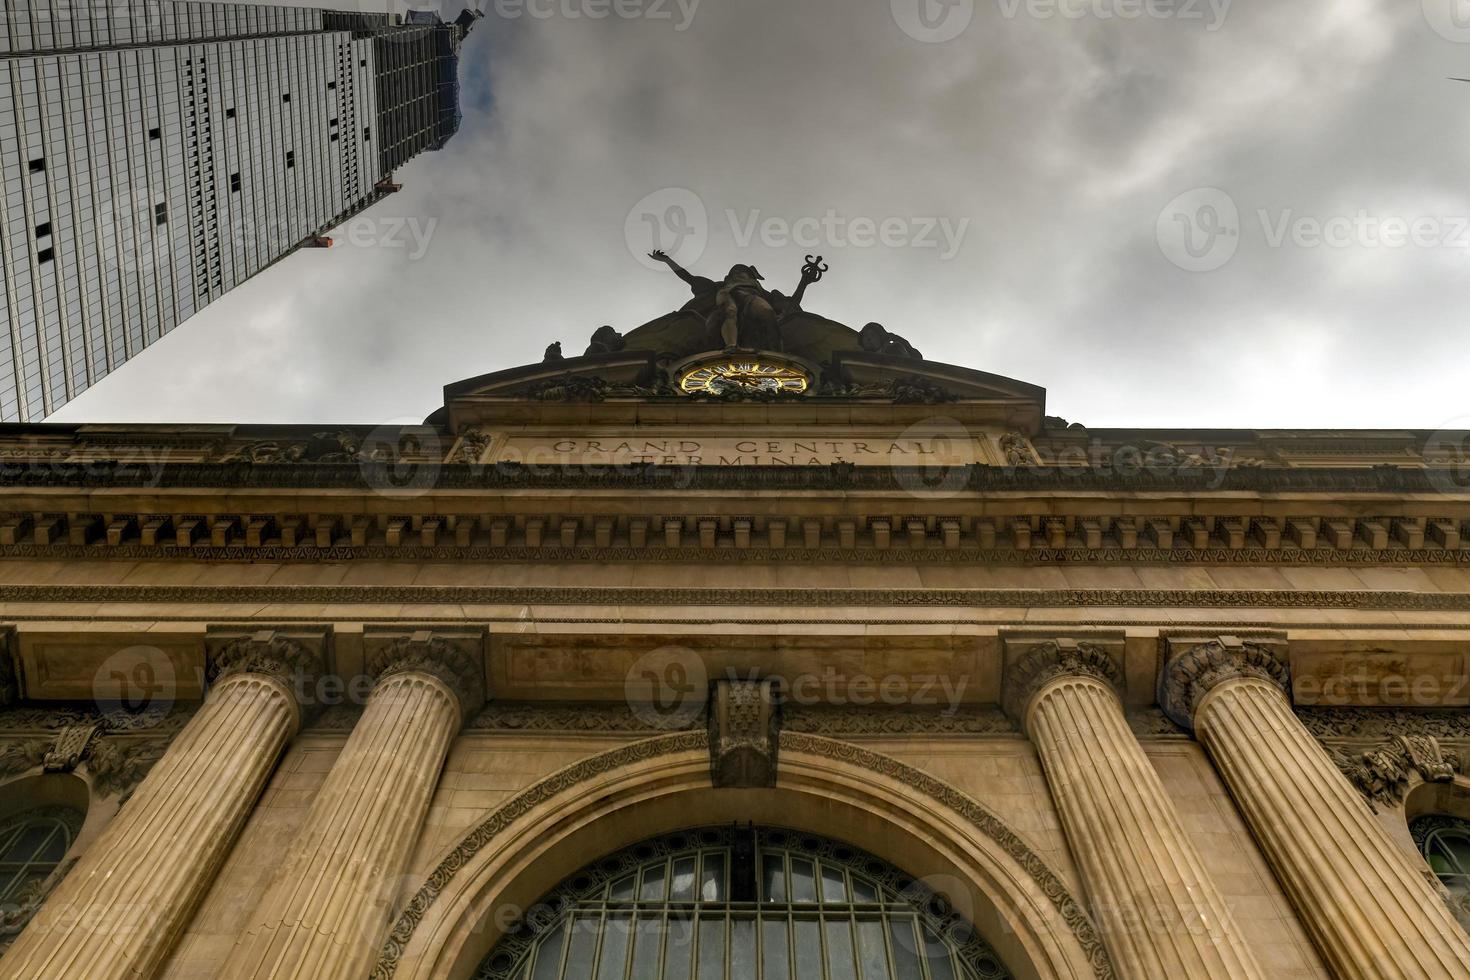 Grand Central Terminal building. Grand Central Terminal is a commuter rail terminal located at 42nd Street and Park Avenue in Midtown Manhattan, New York City. photo